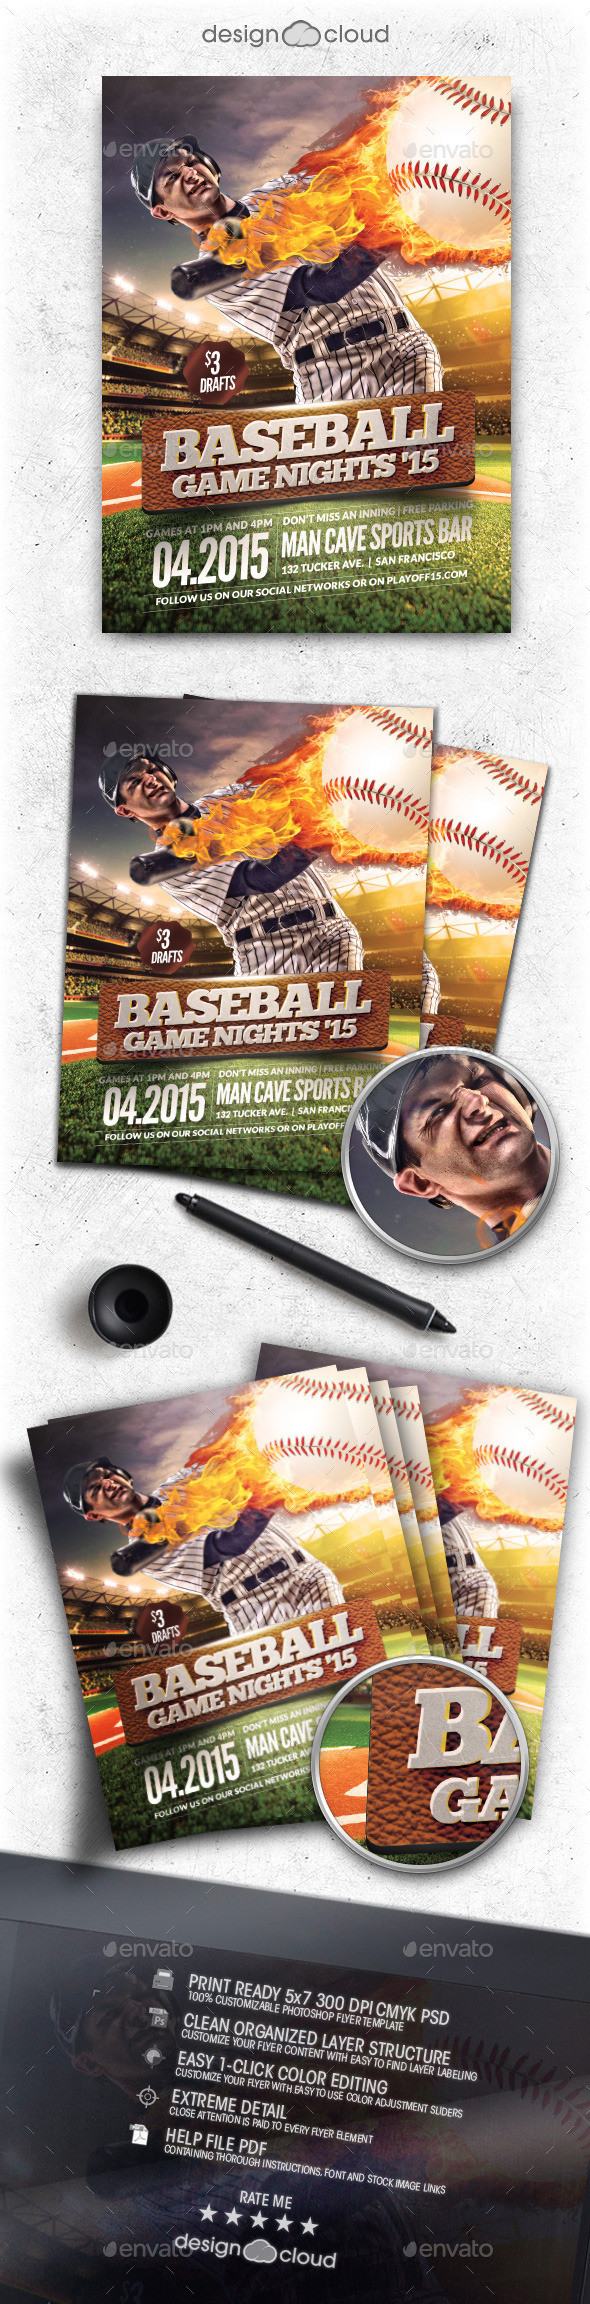 Preview baseball game nights flyer template